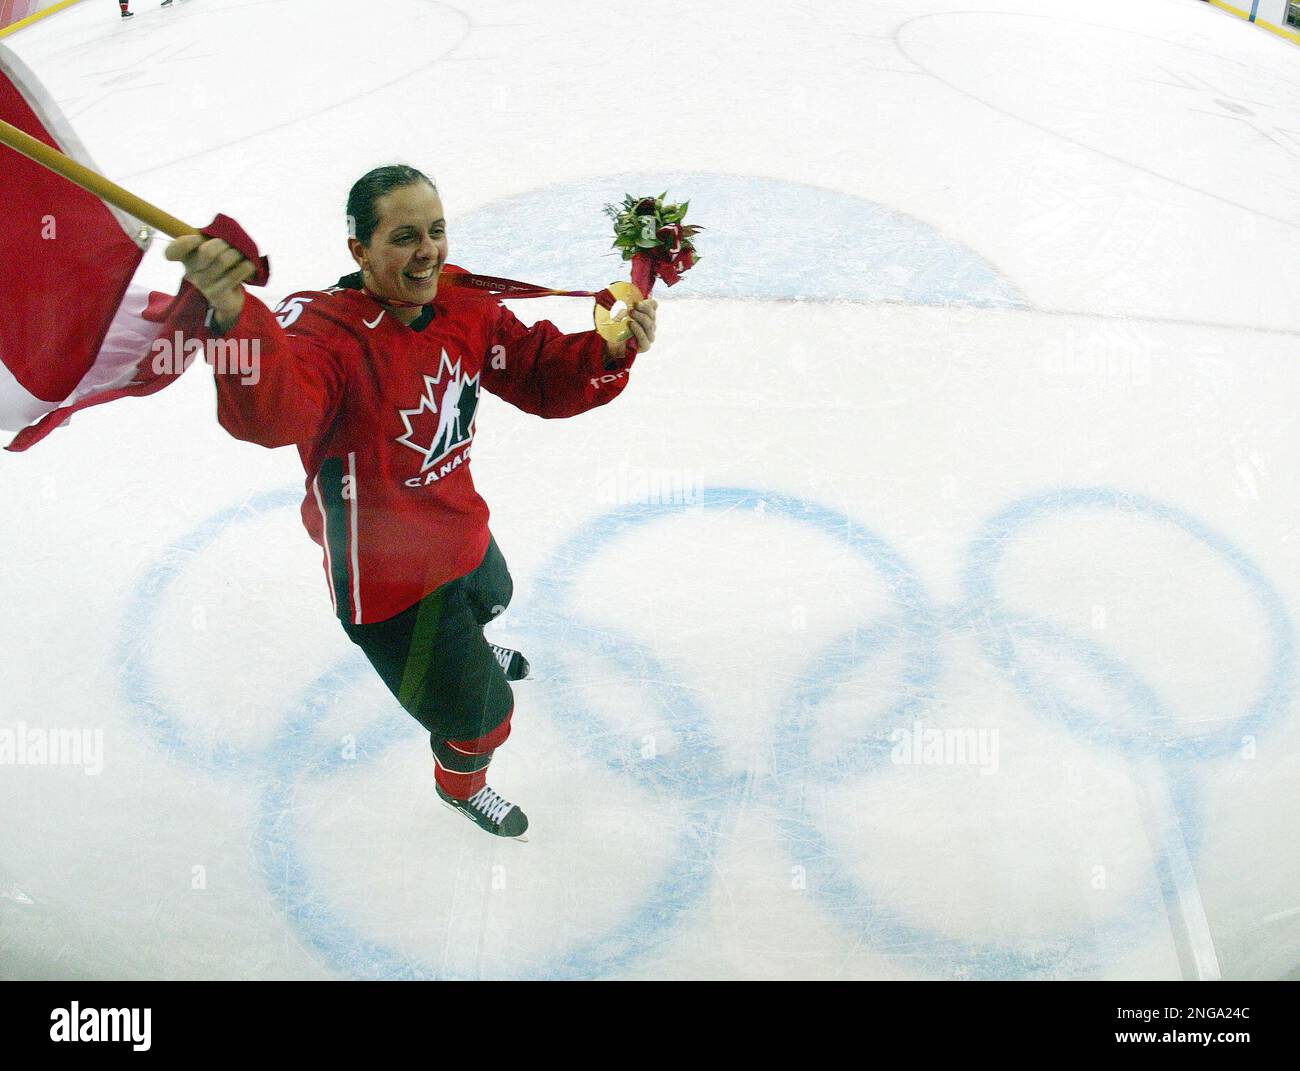 Team Canada's Danielle Goyette carries her nations flag as she shows off her gold medal after Canada defeated Sweden 4-1 in the womens ice hockey gold medal match of the 2006 Turin Winter Olympic Games in Turin, Italy Monday Feb. 20, 2006. (AP Photo/Julie Jacobson) Stock Photo